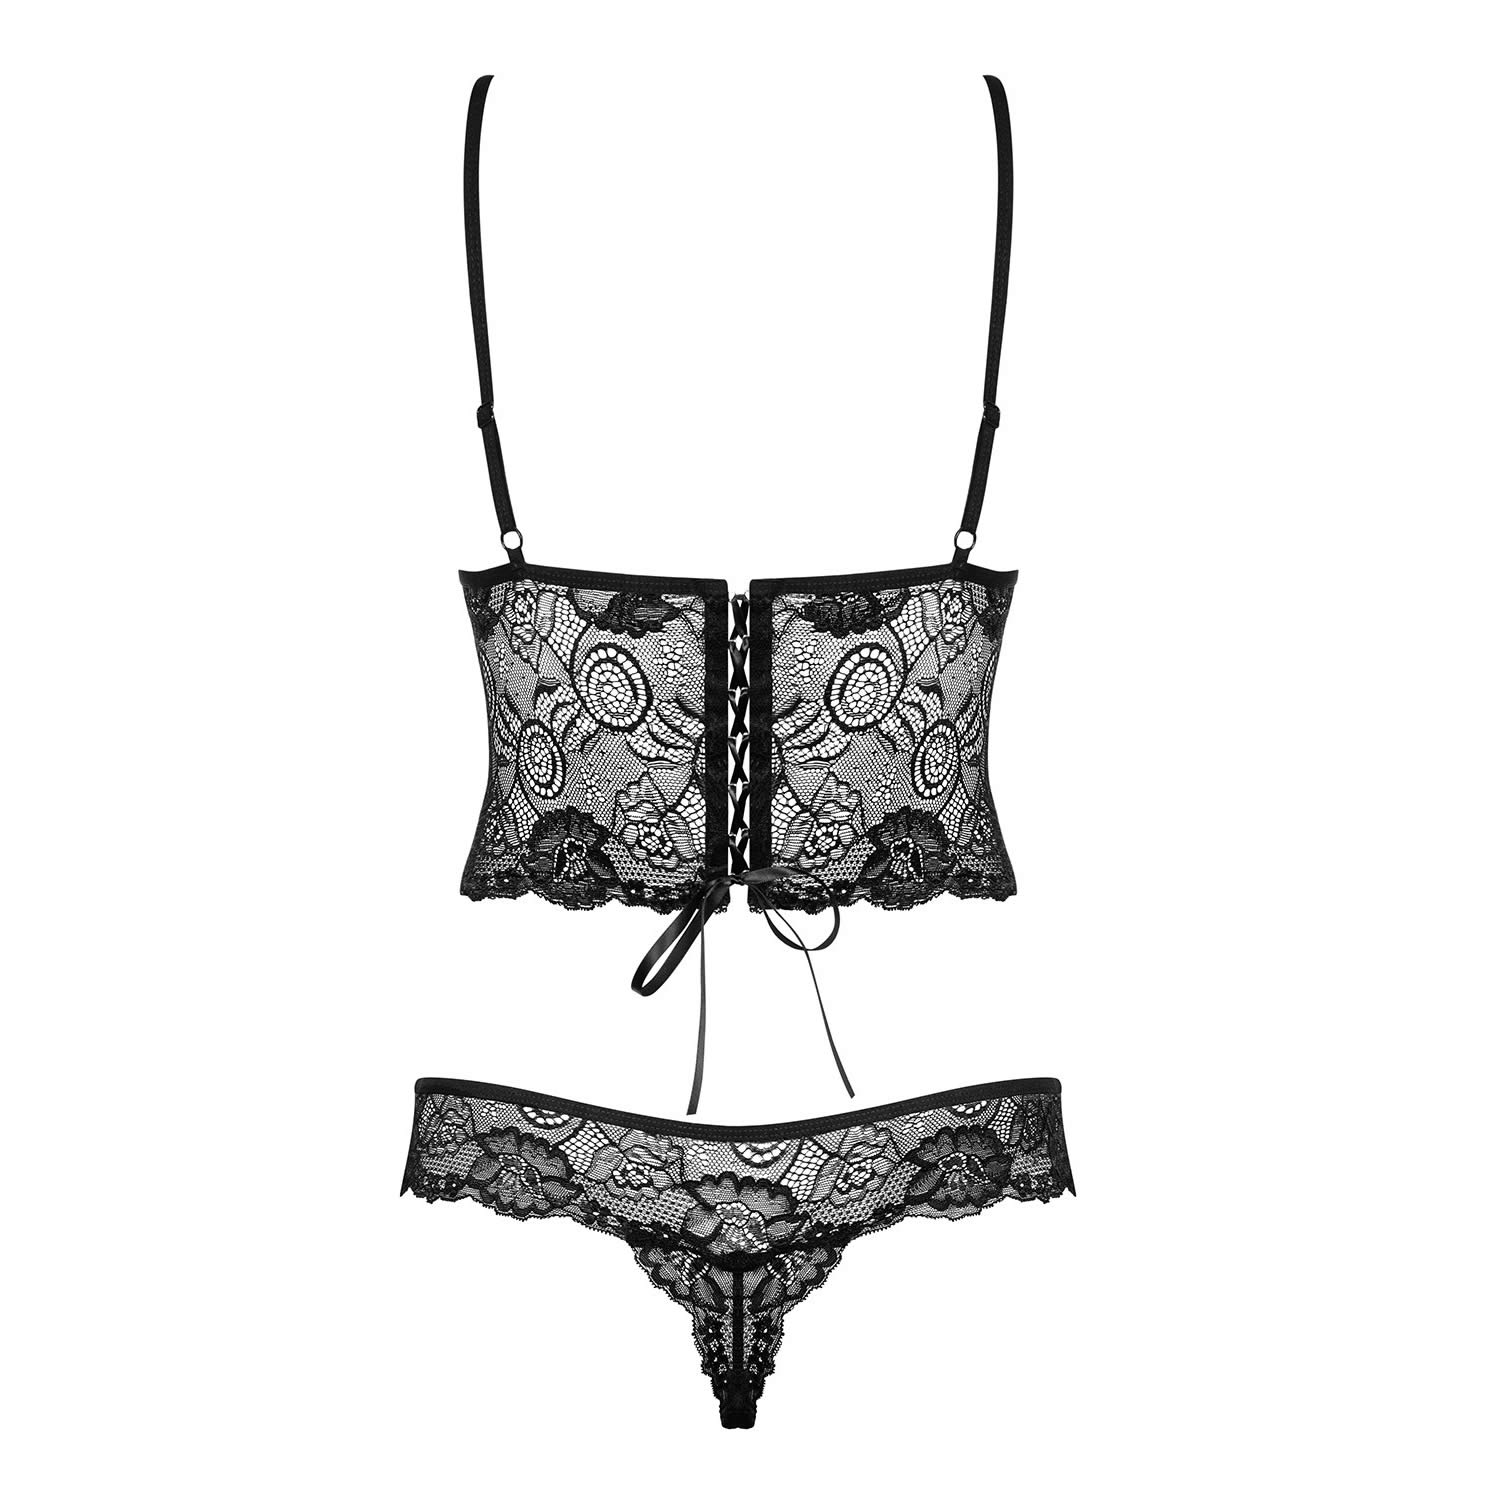 Obsessive G-String Body Camilla made of Lace